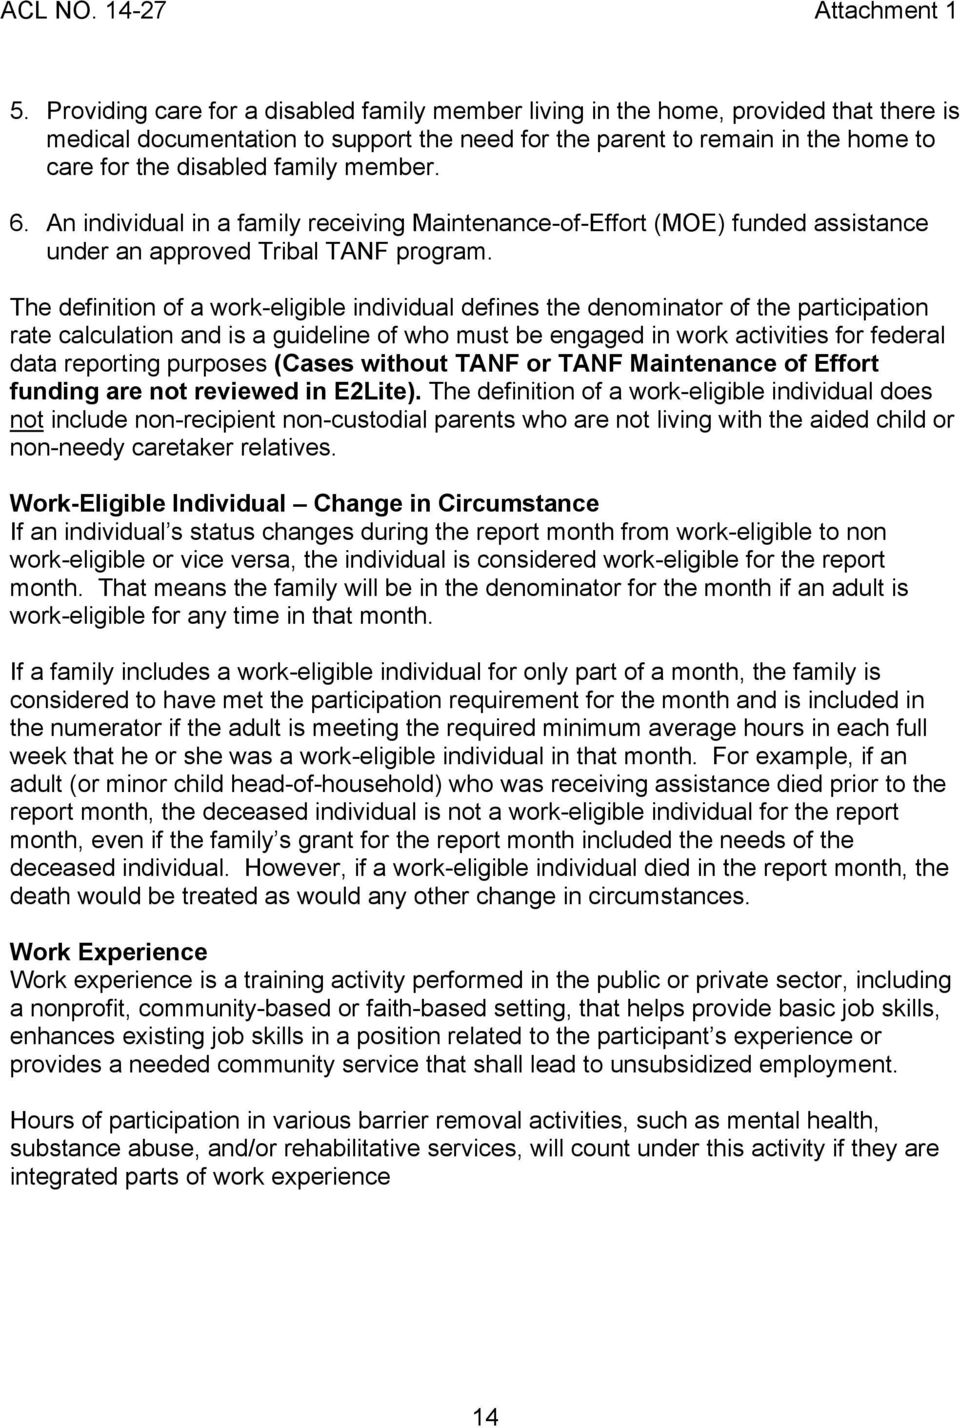 member. 6. An individual in a family receiving Maintenance-of-Effort (MOE) funded assistance under an approved Tribal TANF program.